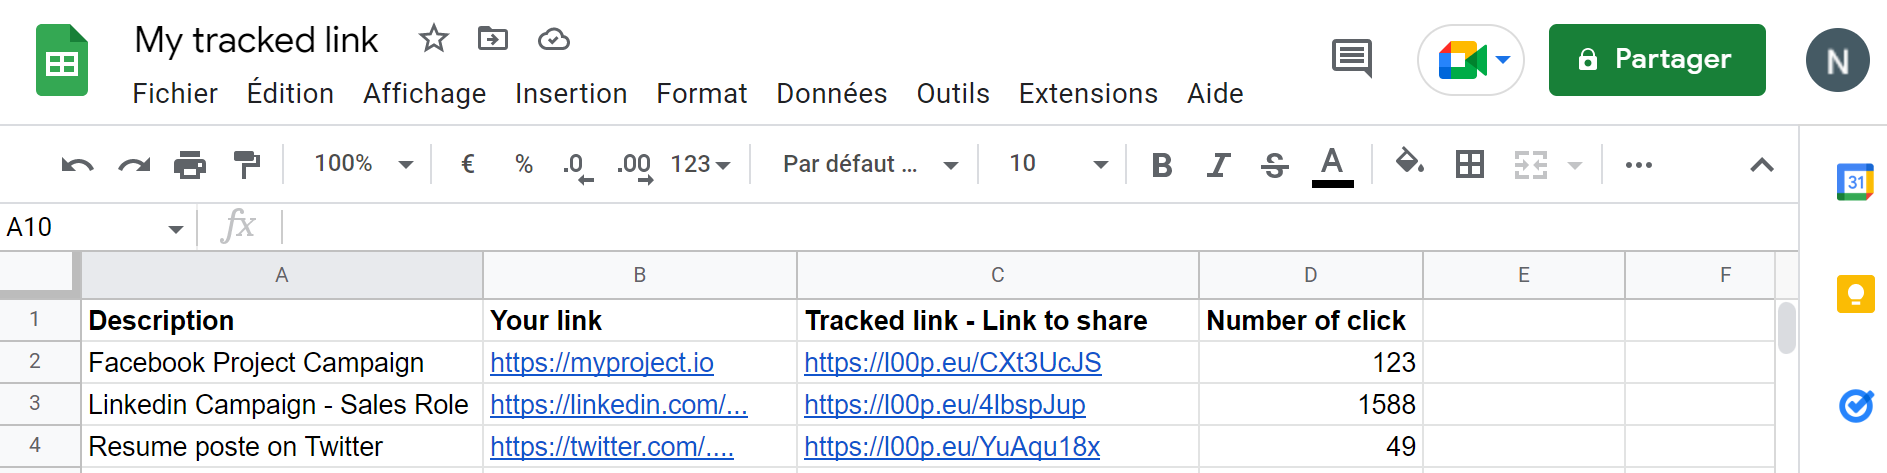 Example of using sheet and Link tracker